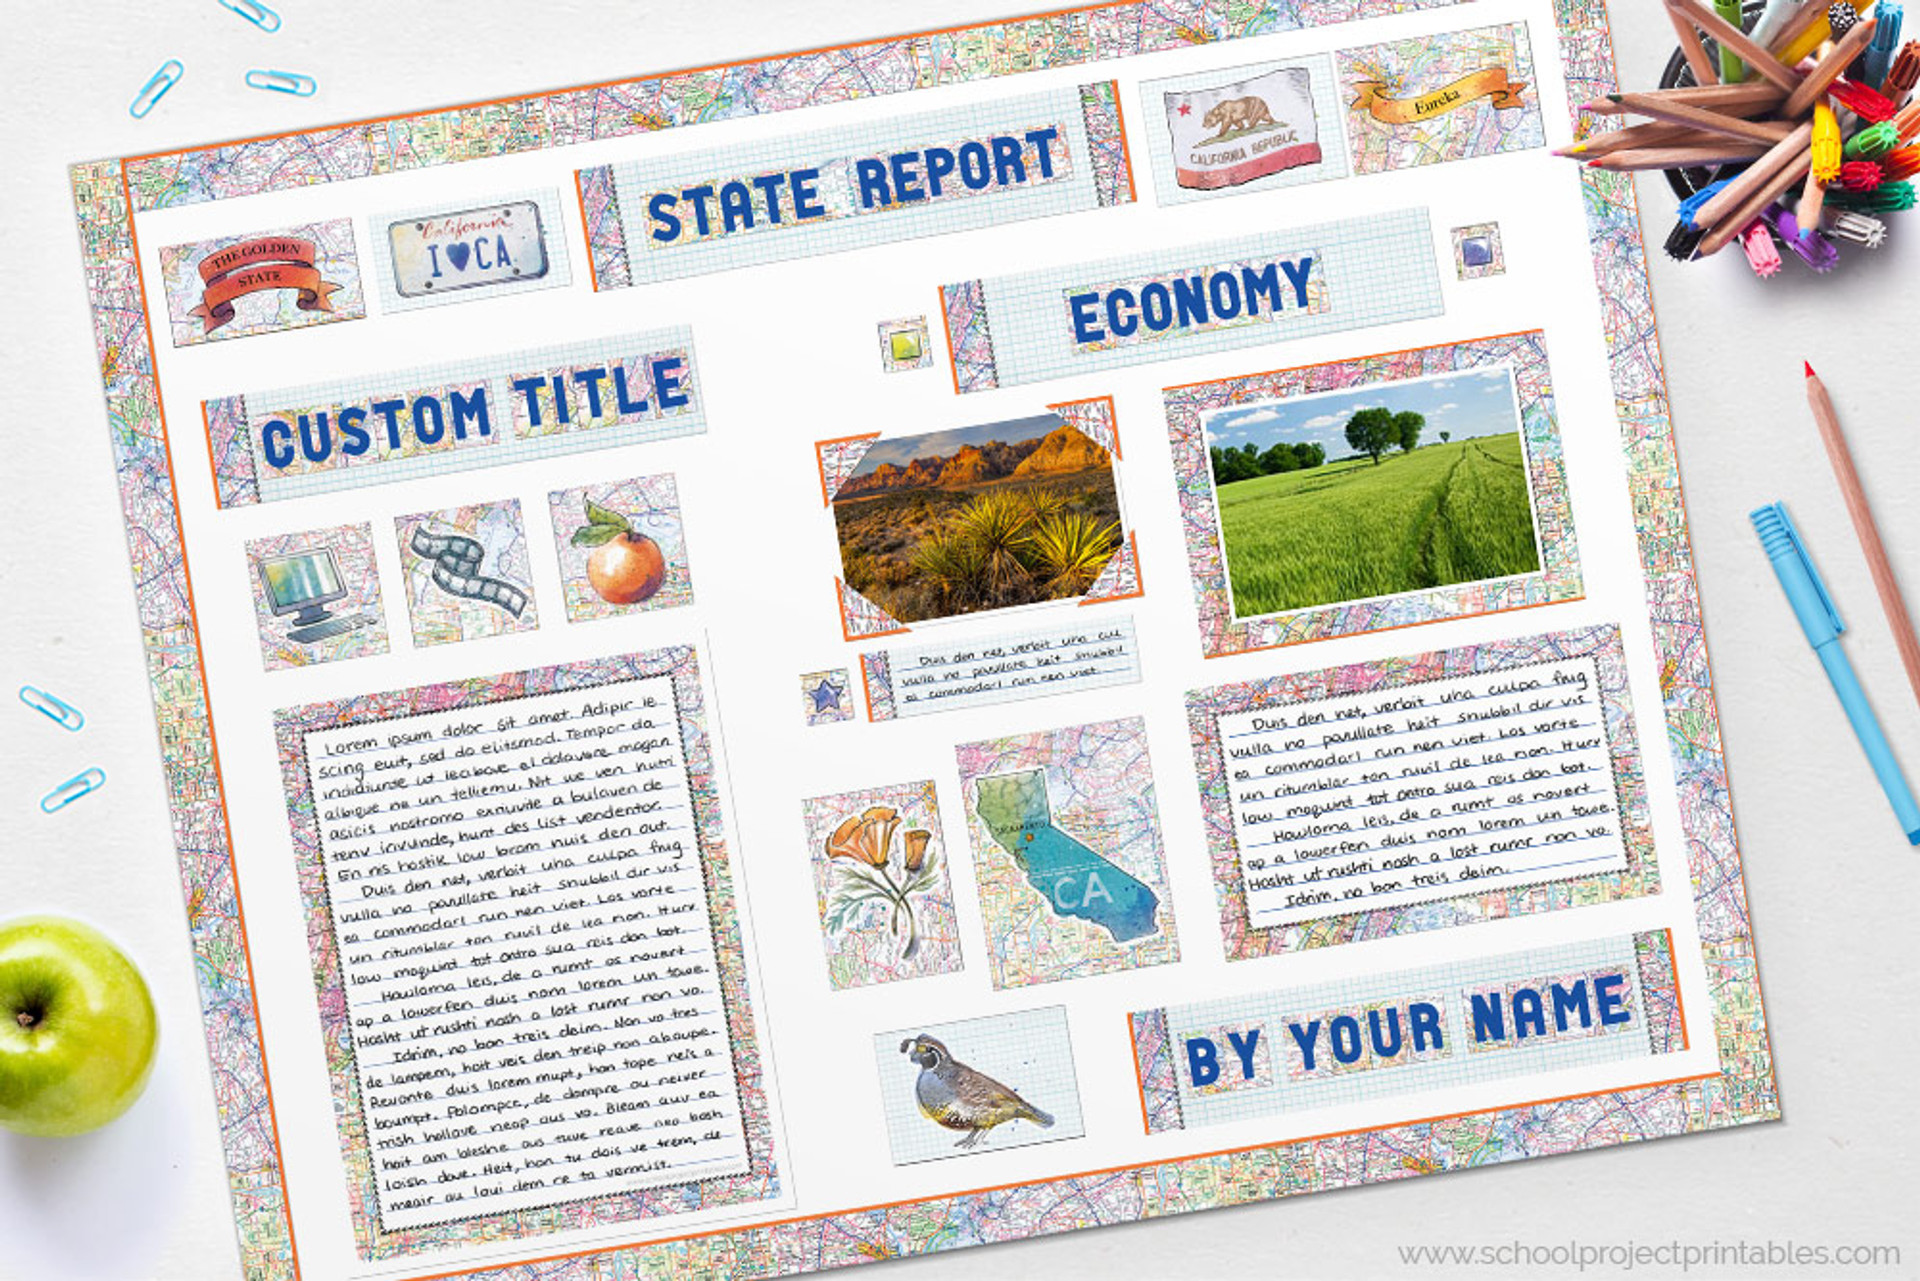 state-report-poster-tutorial-school-project-printables